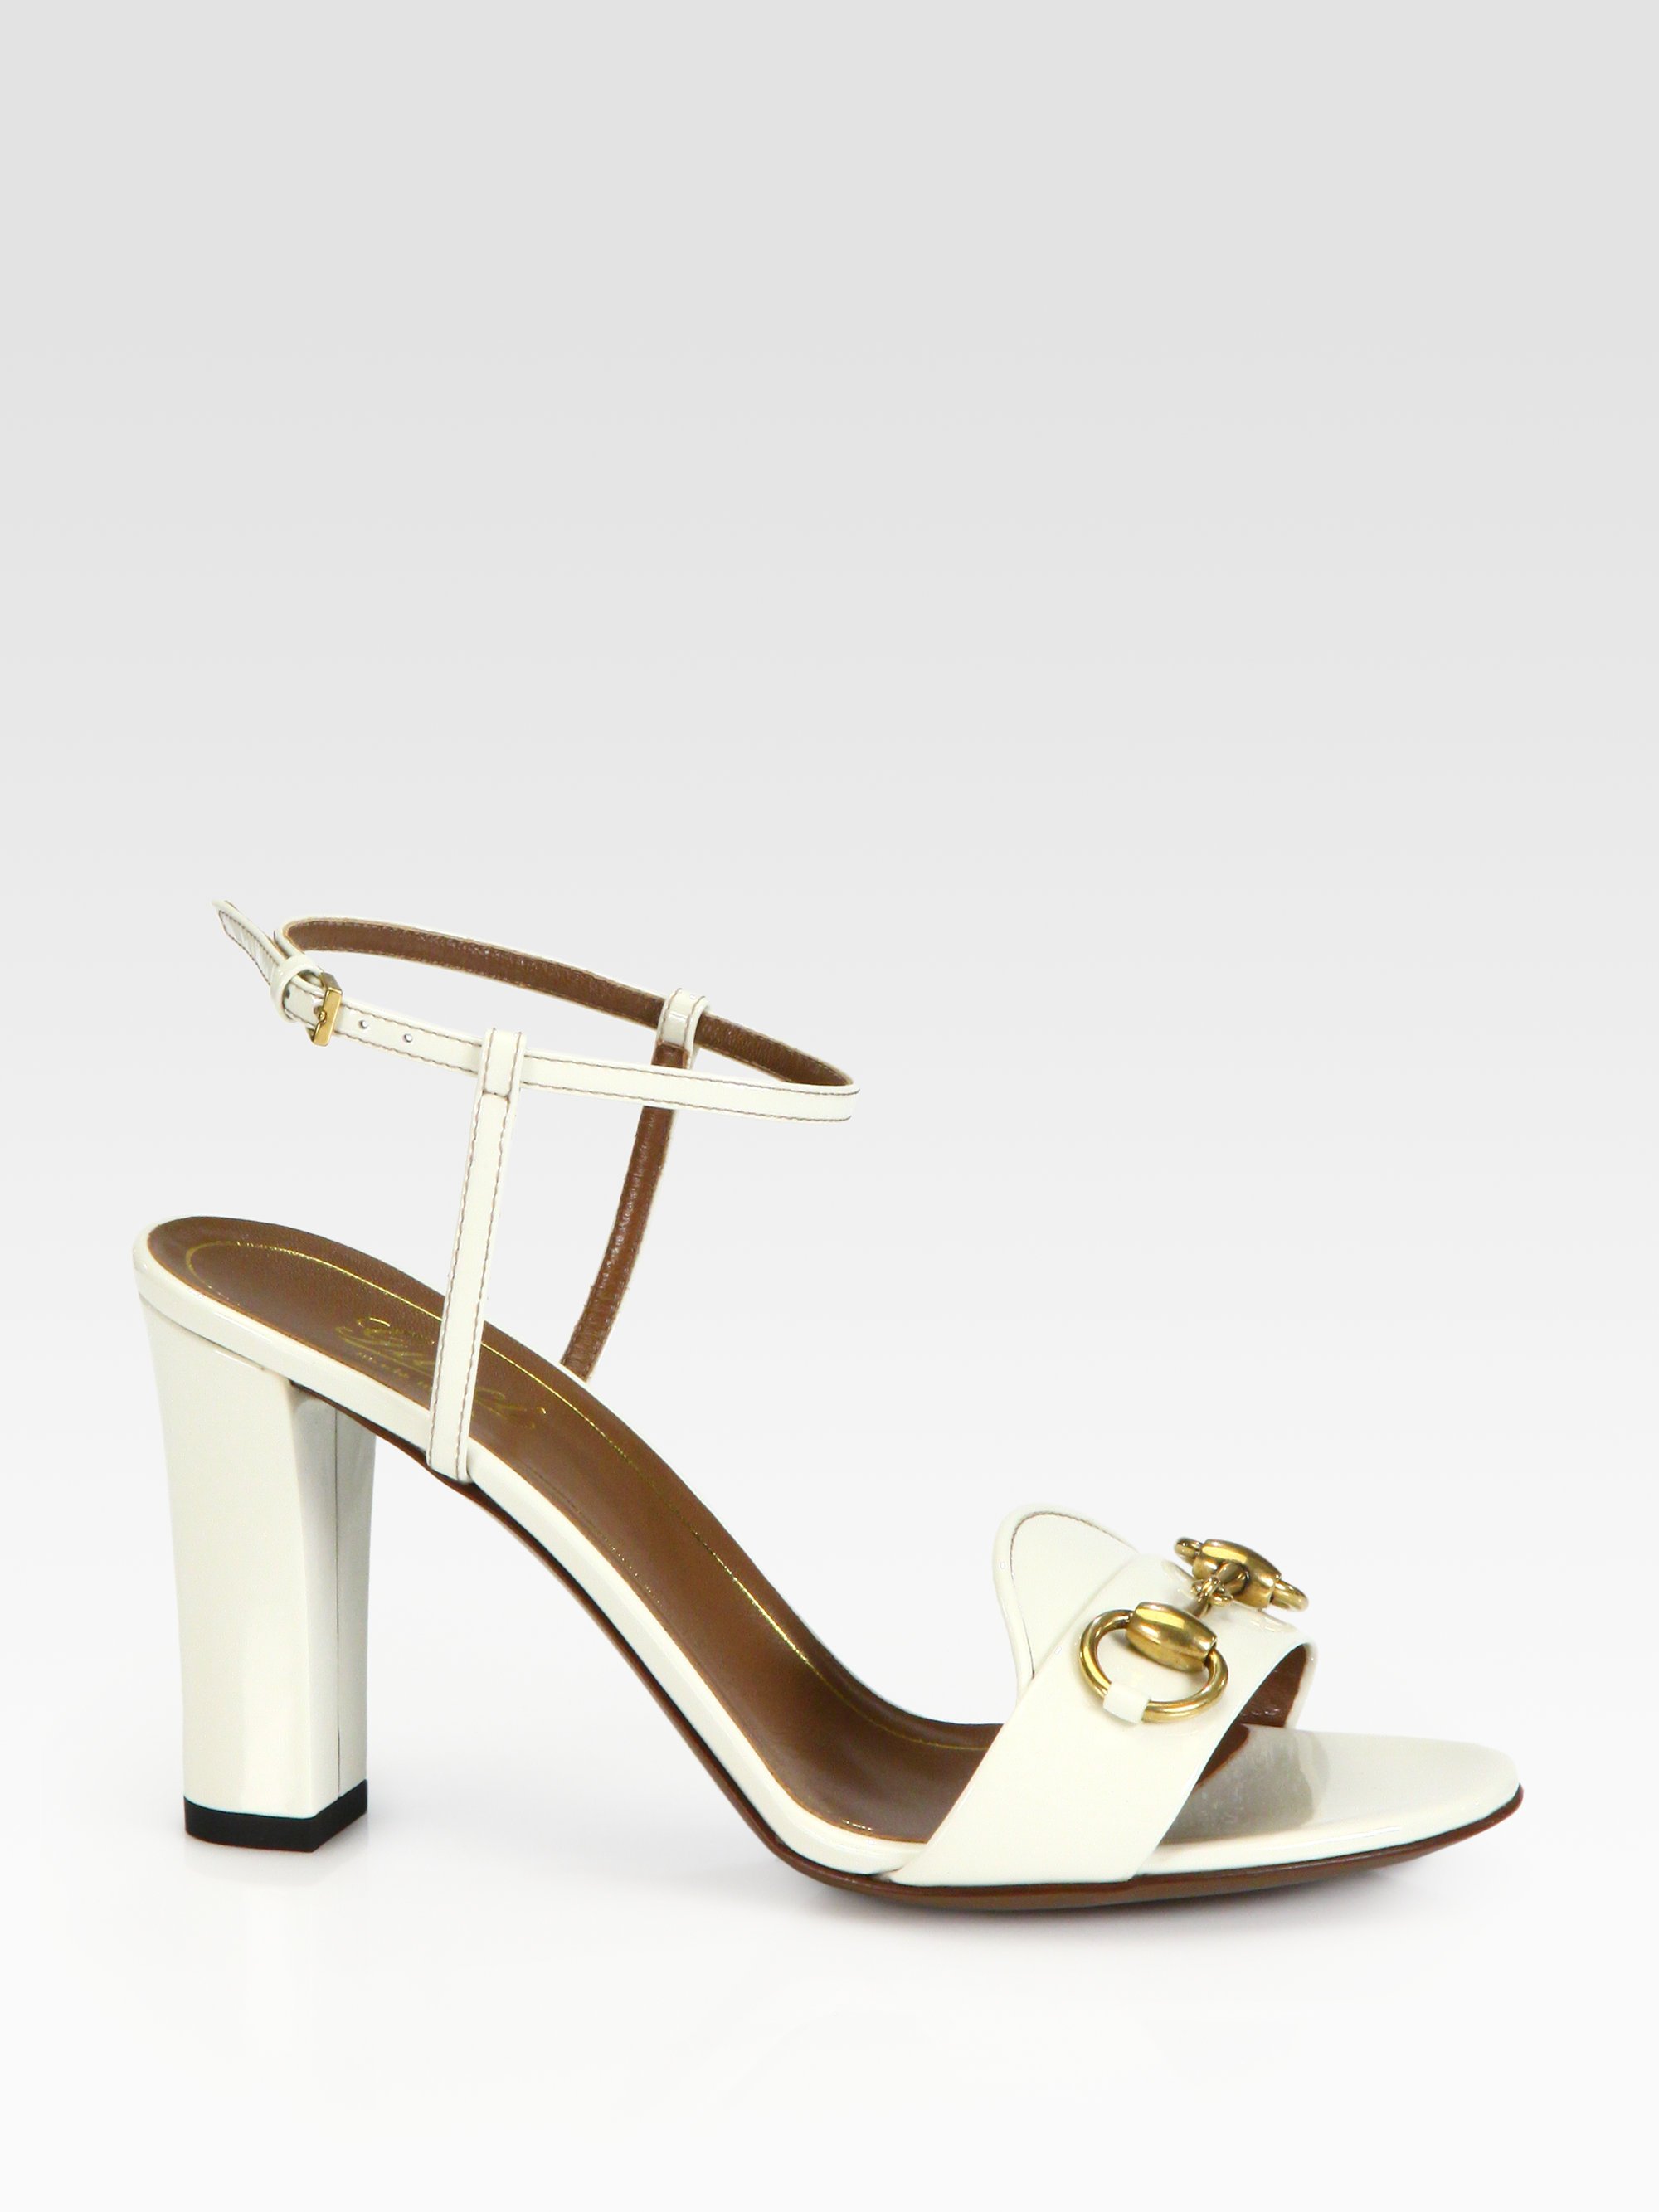 Gucci Heels, Sandals & Shoes for Women